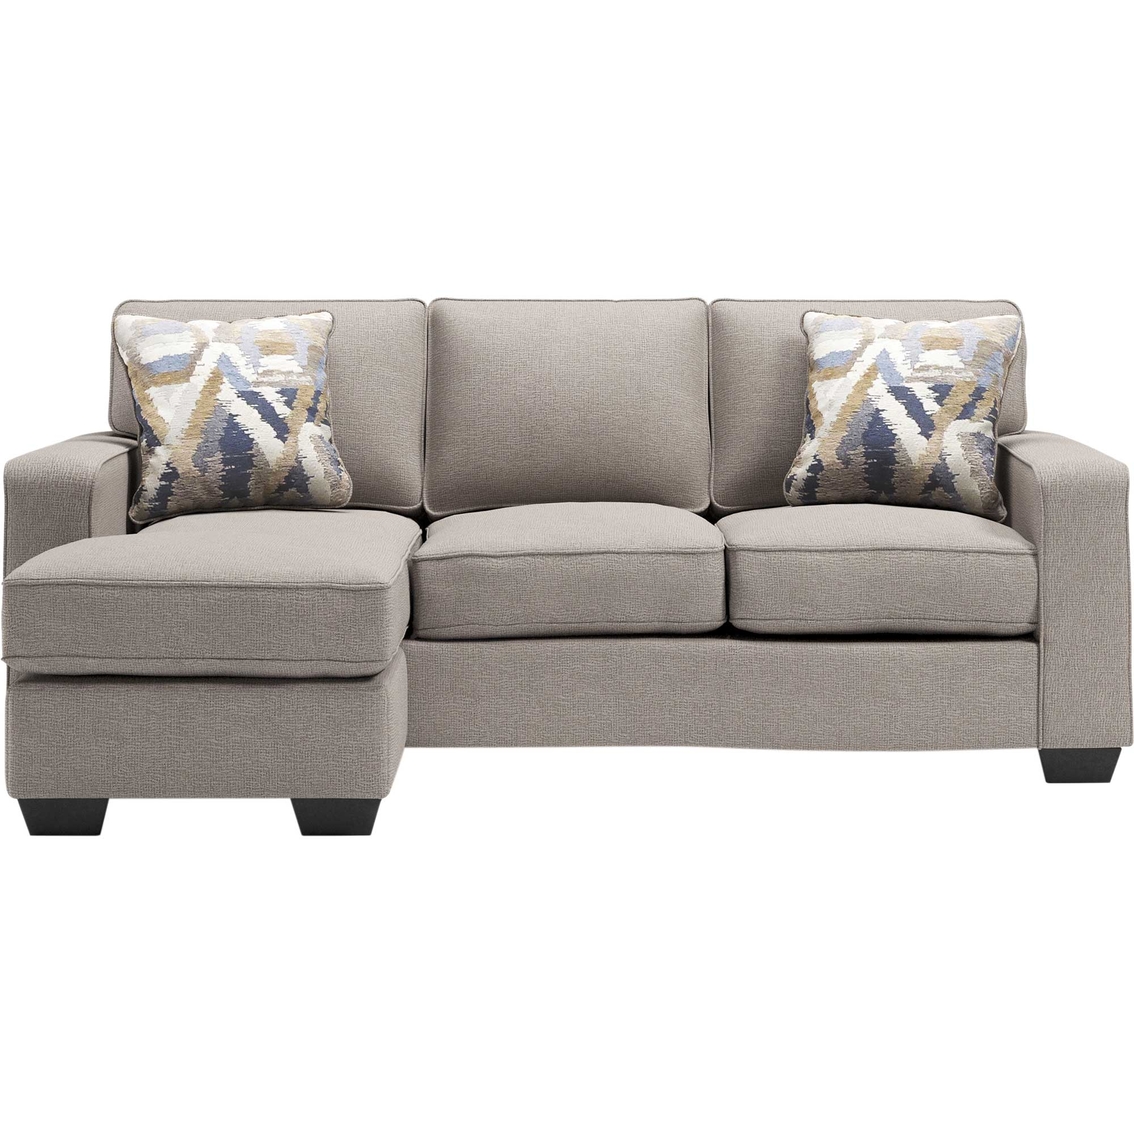 Signature Design by Ashley Greaves Sofa Chaise - Image 2 of 5